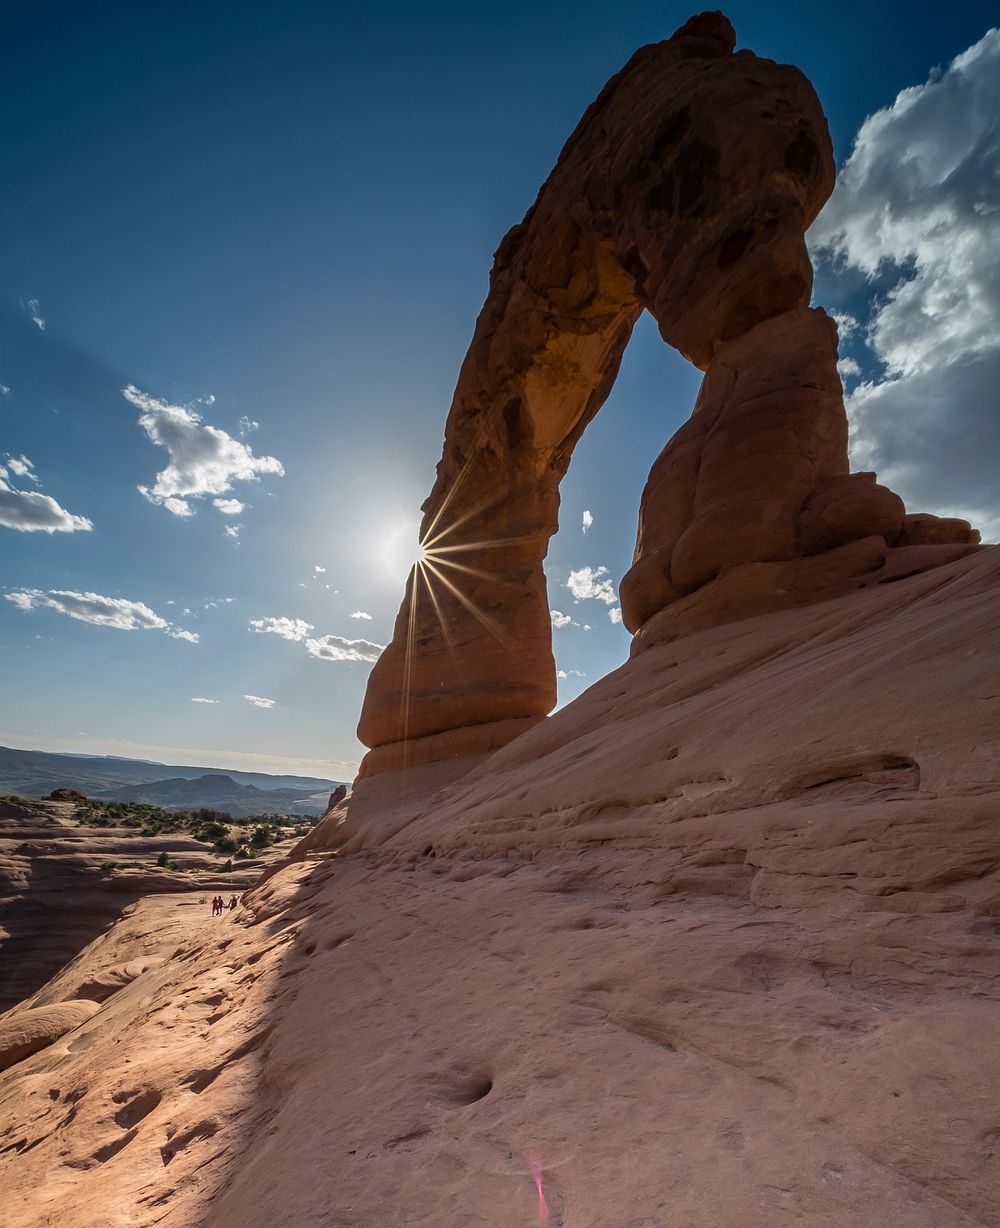 Sunrise at the Delicate Arch in Arches National Park, North America